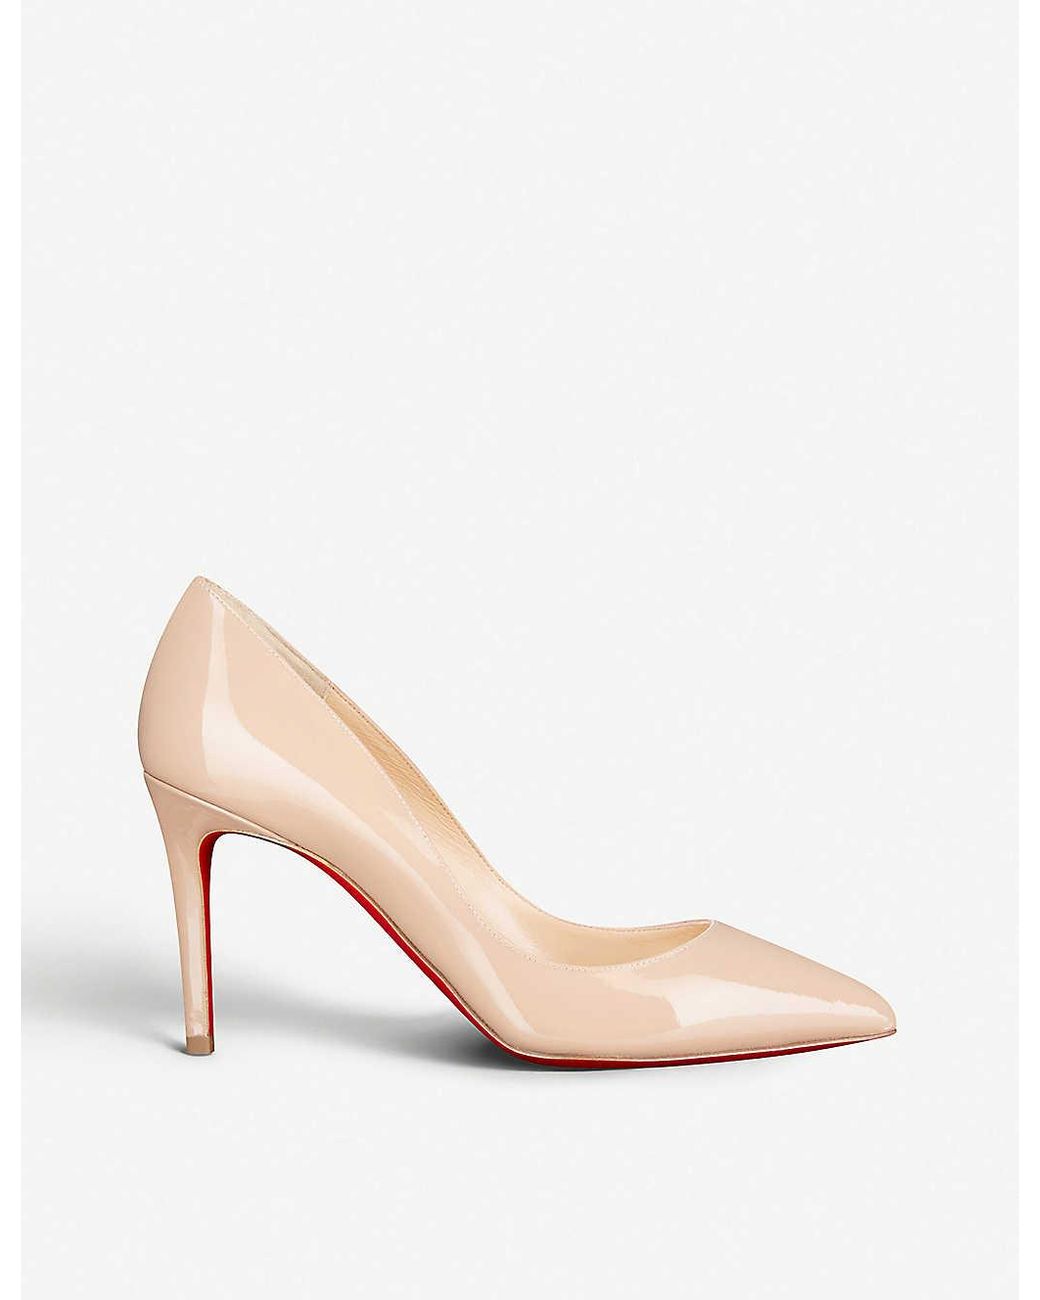 Christian Louboutin Pigalle 85 Patent Calf in Pink | Lyst